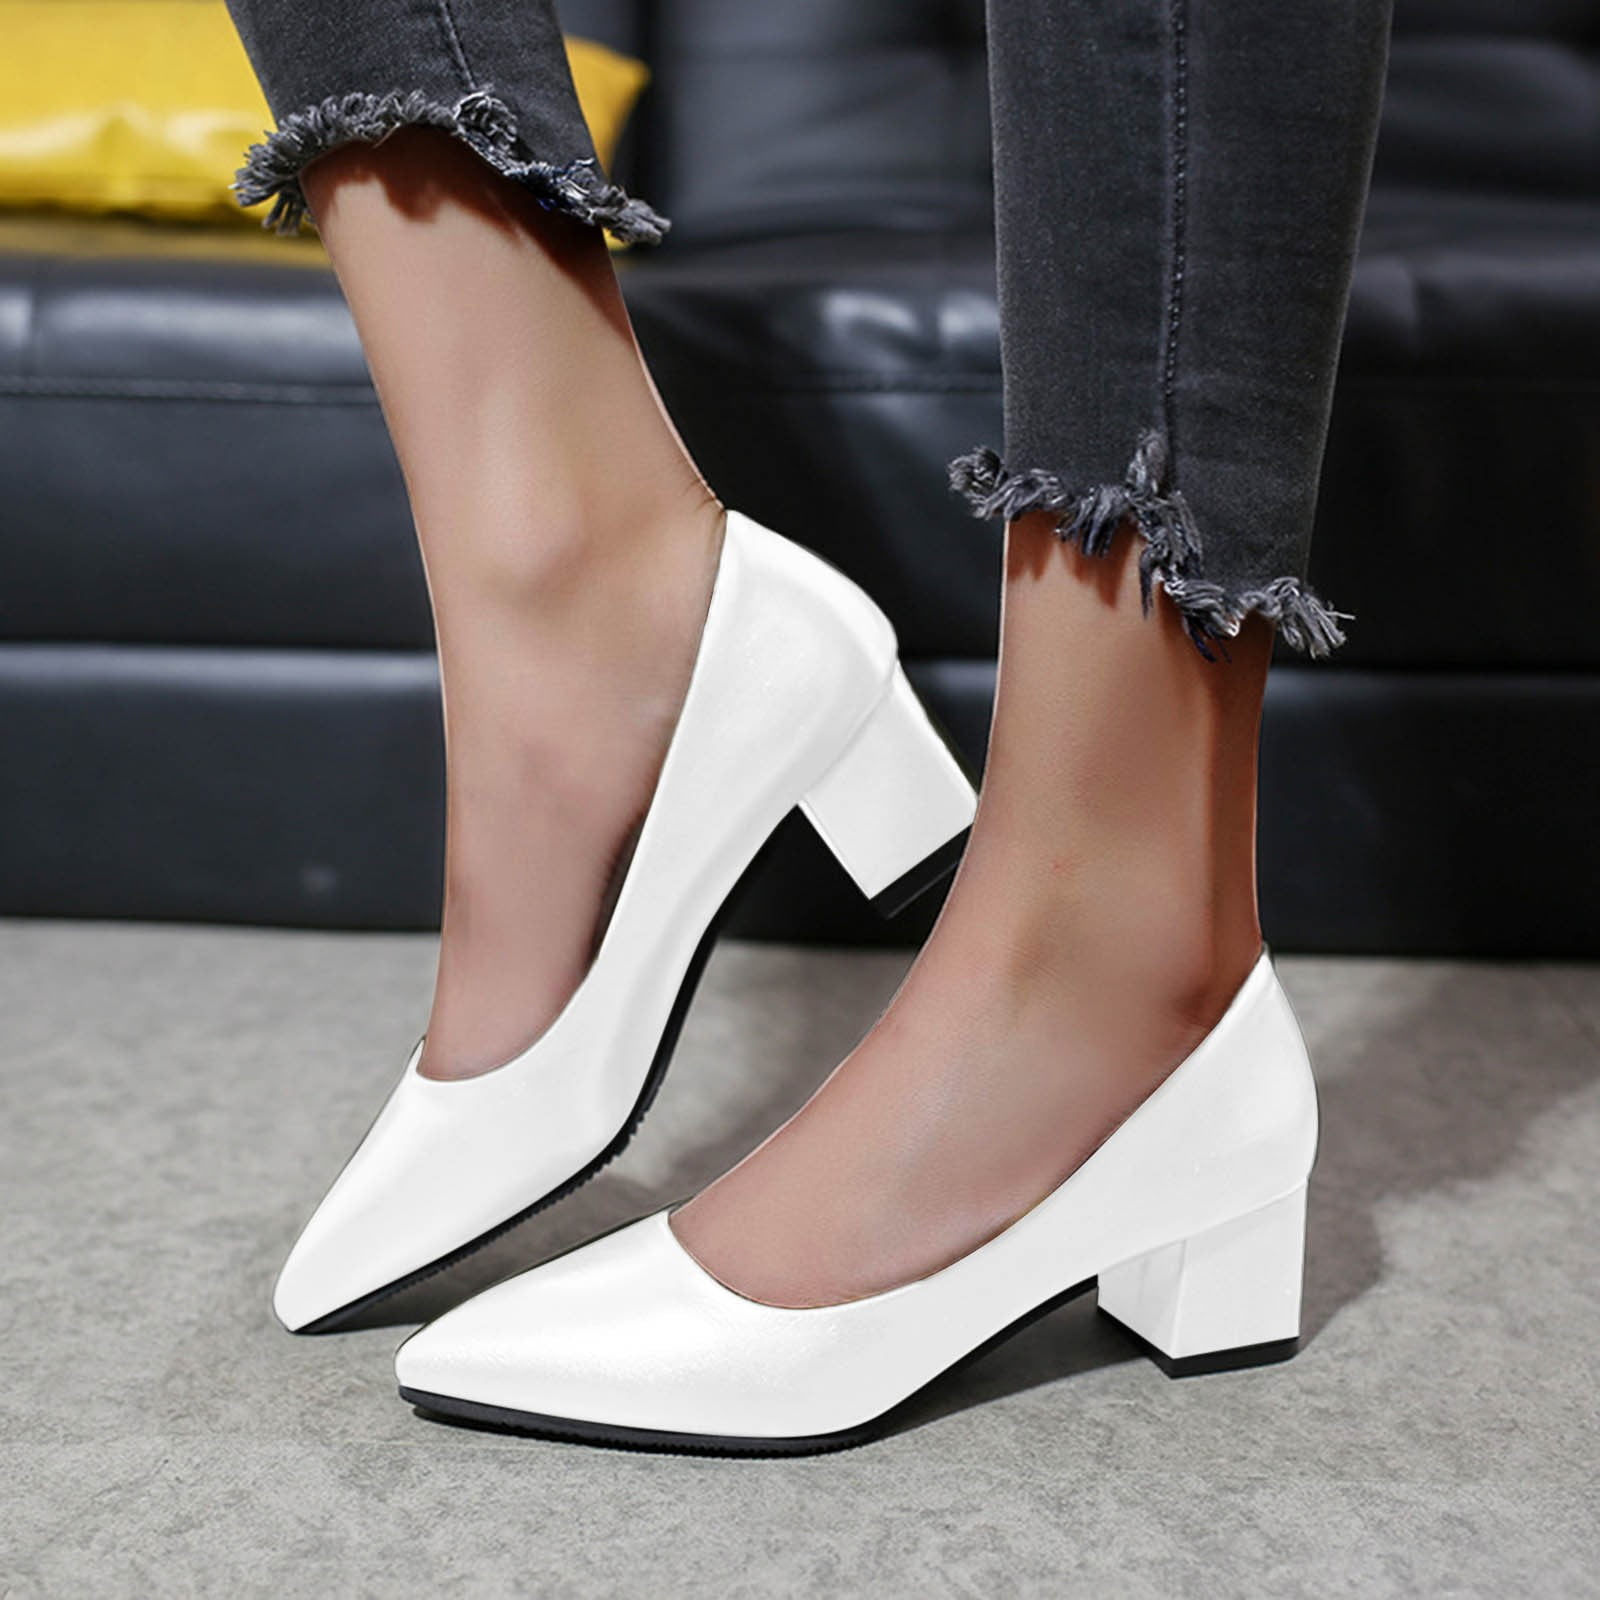 Ladies Pointed Closed-Toe Ankle Strap Heel - White